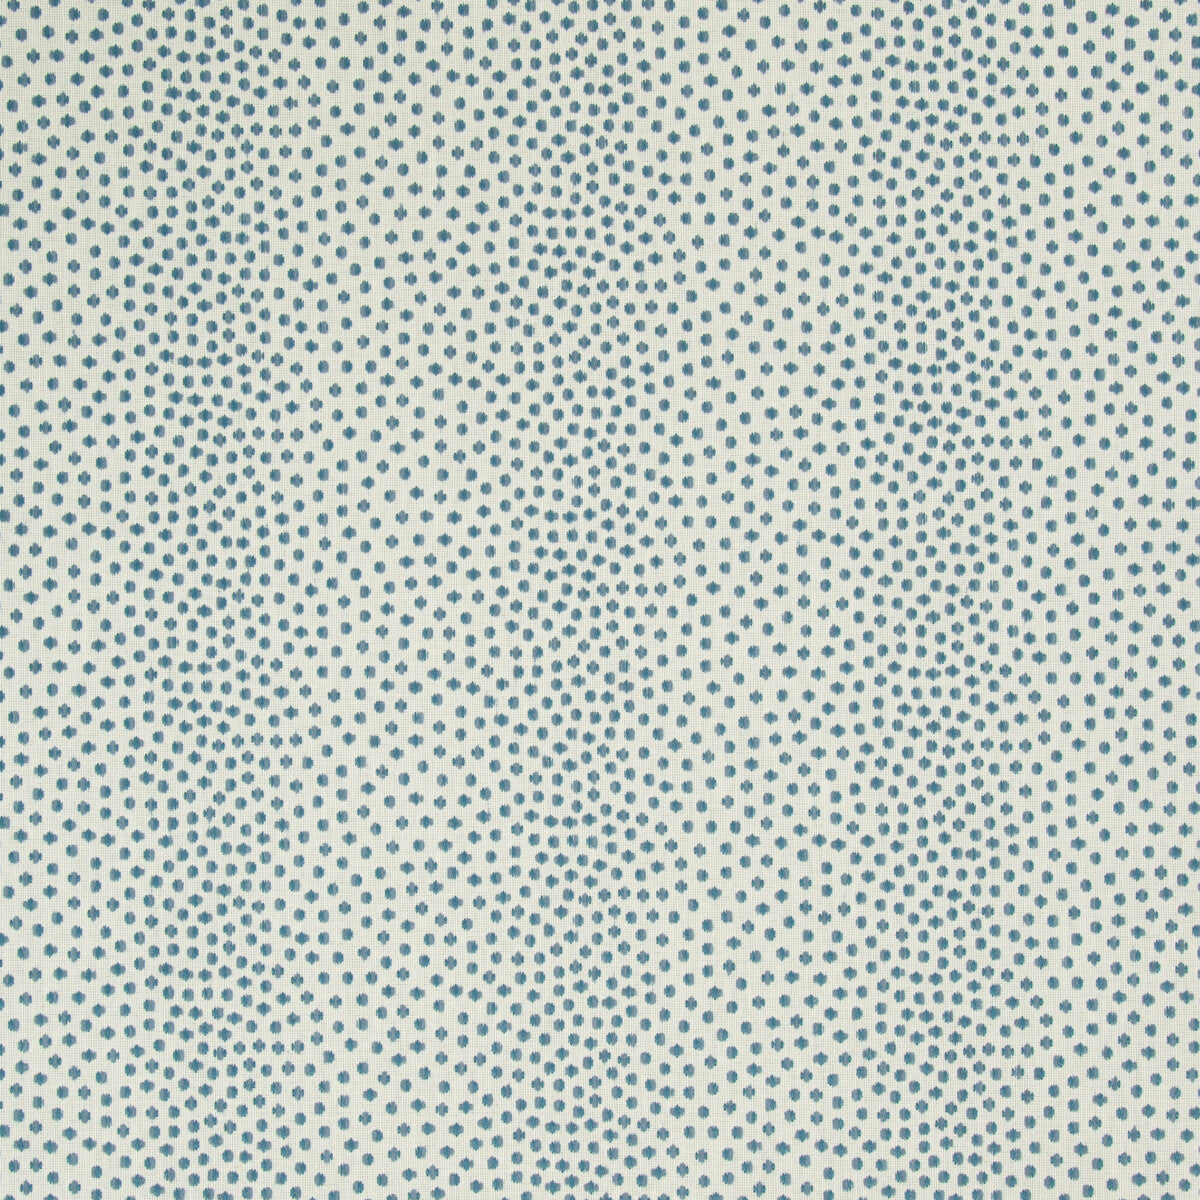 Kravet Contract fabric in 34748-5 color - pattern 34748.5.0 - by Kravet Contract in the Crypton Incase collection